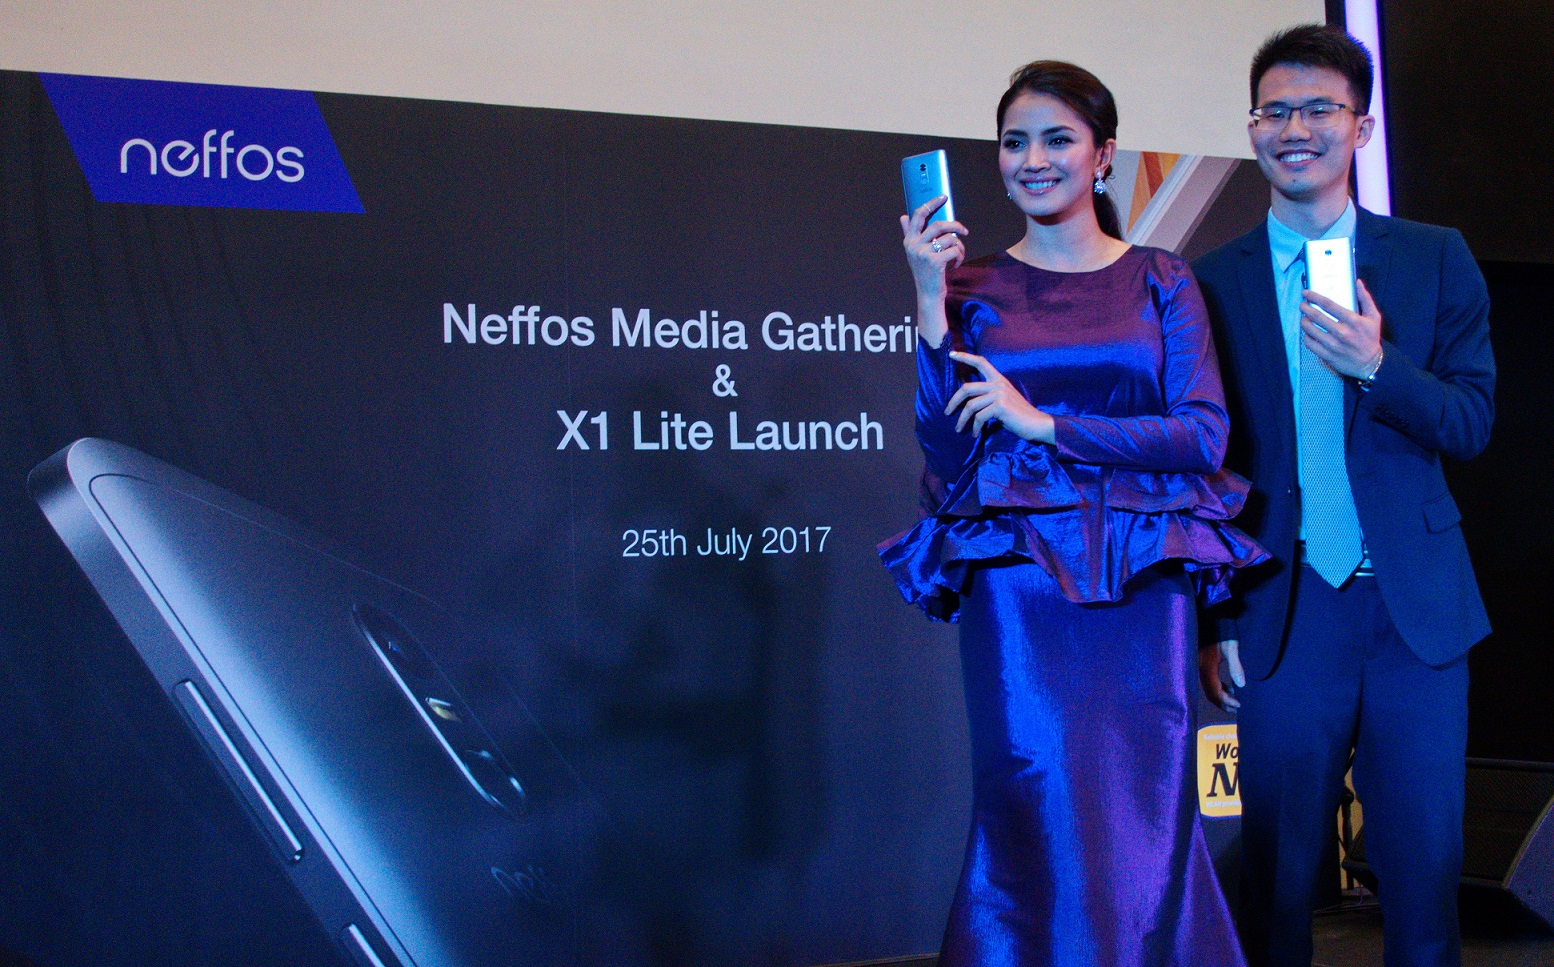 Neffos introduces the affordable X1 Lite